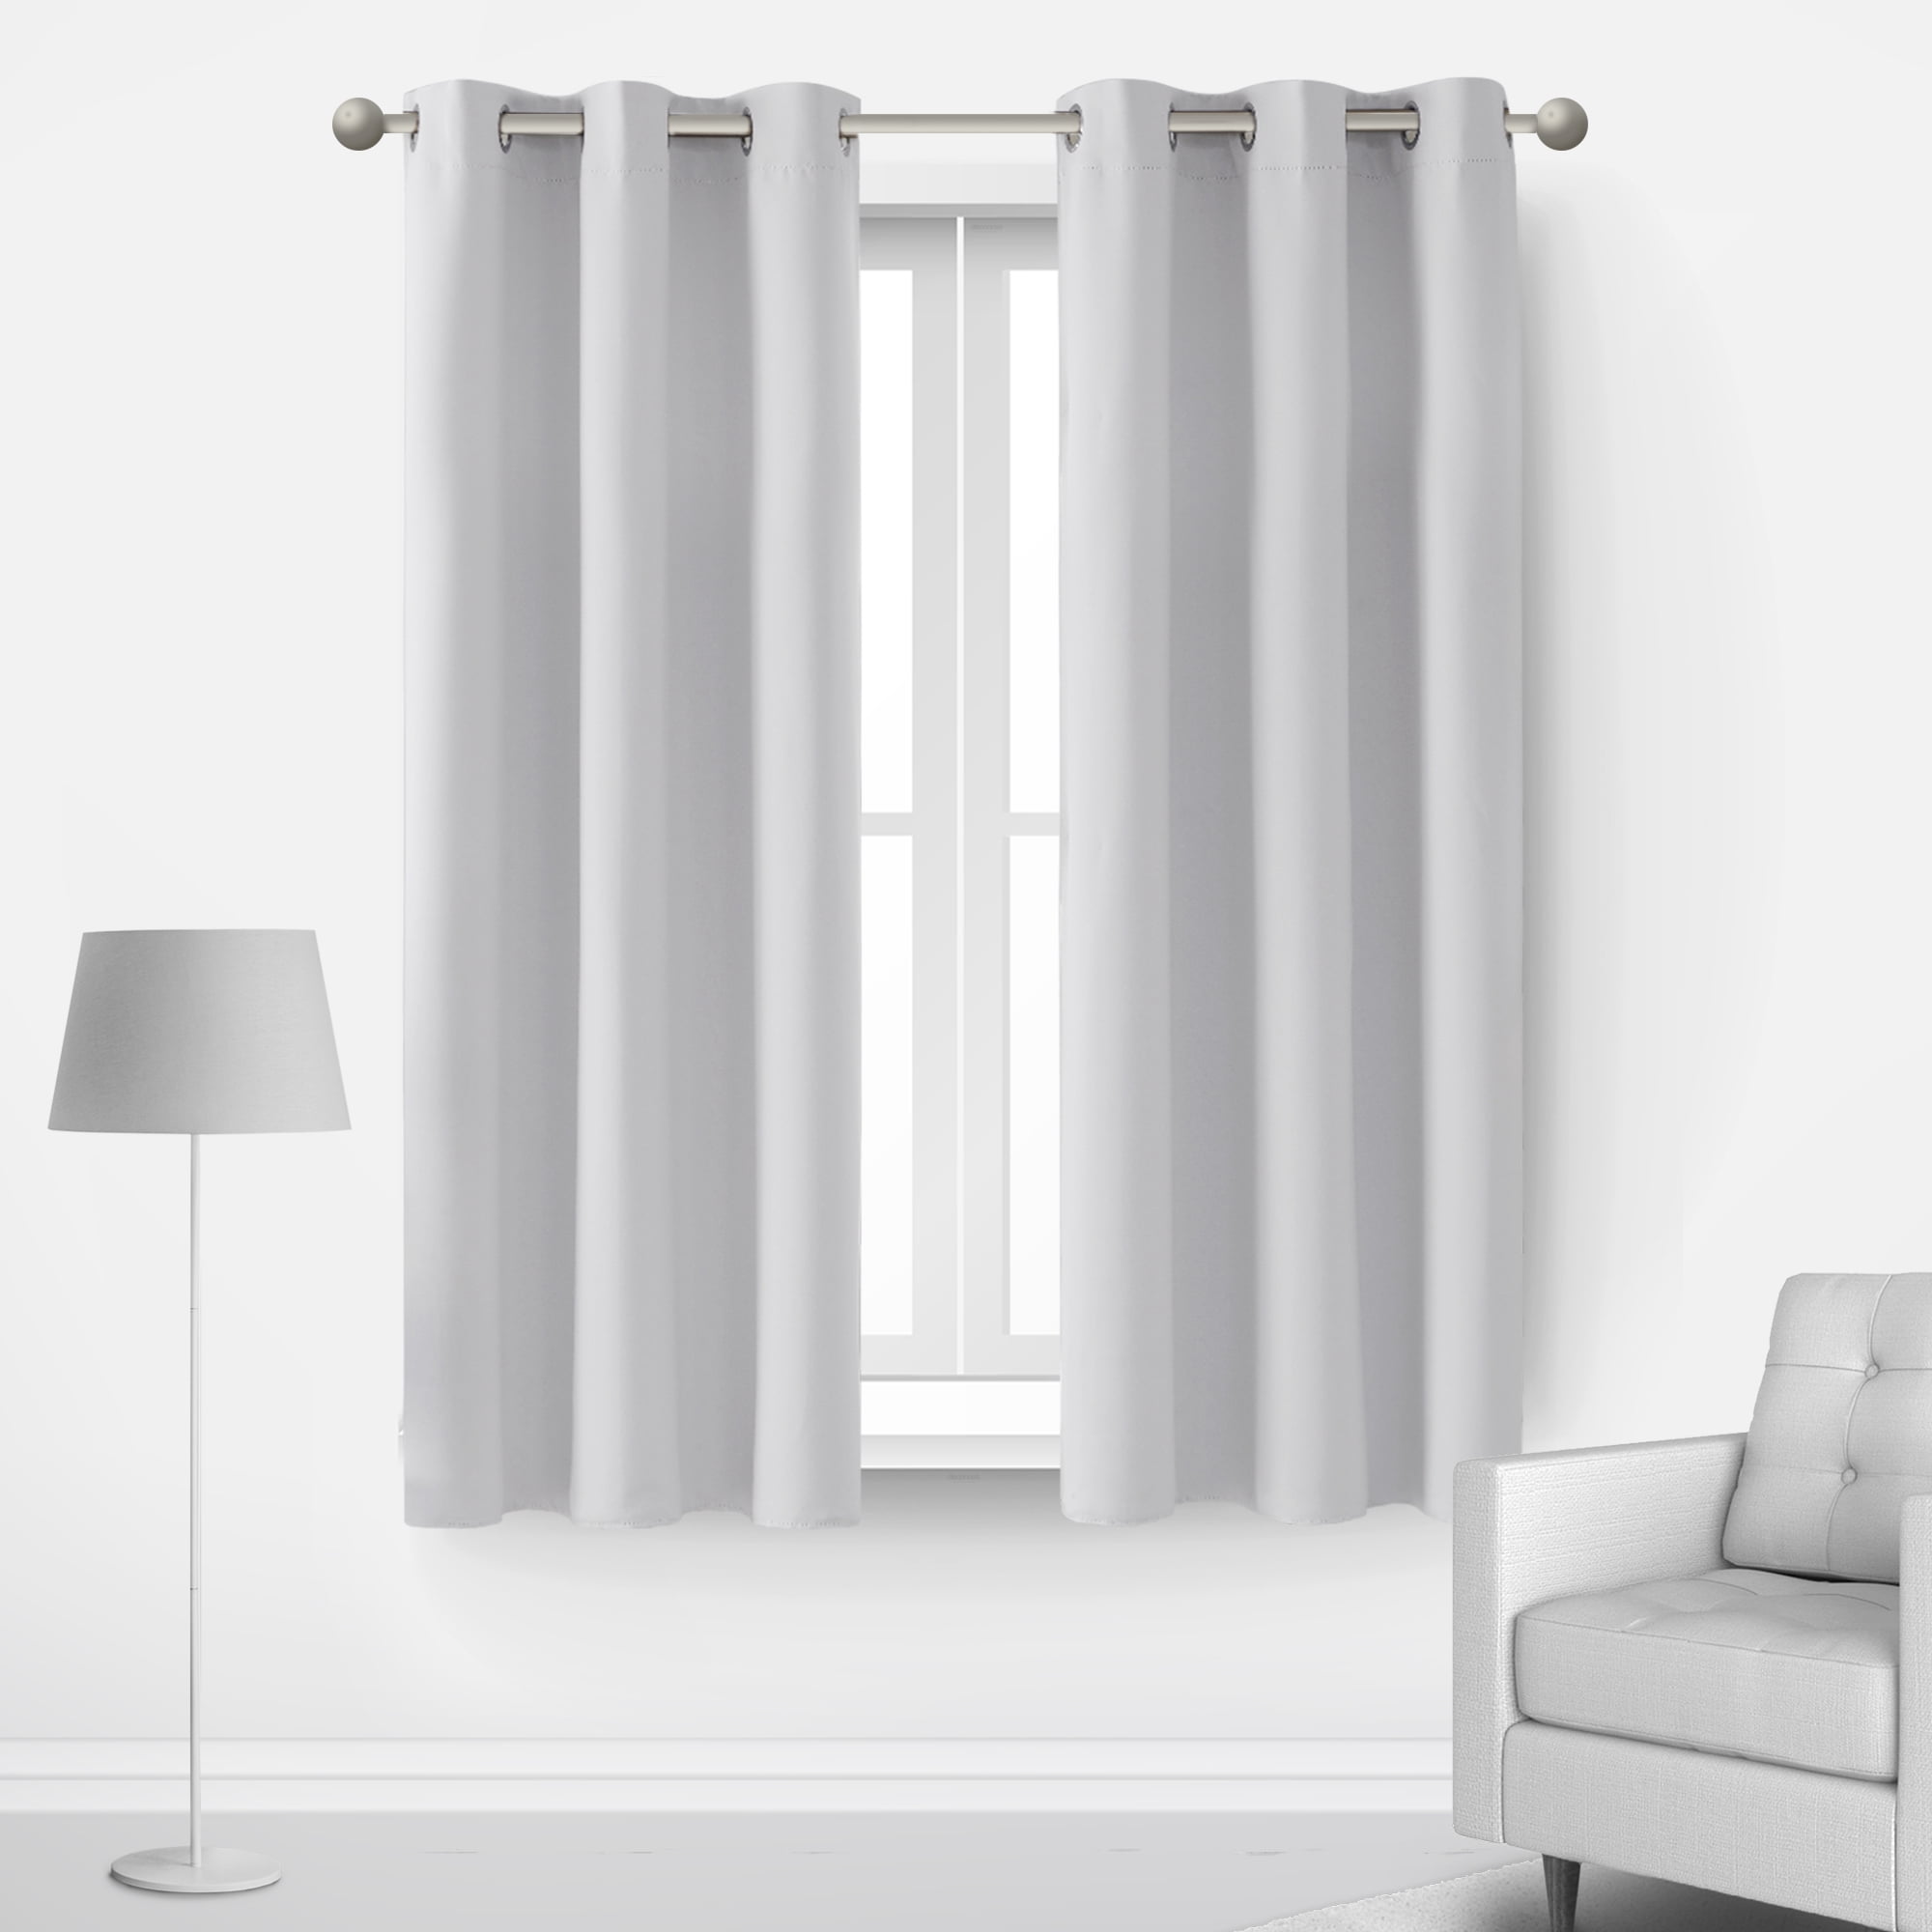 Details about   2 Panel Spiderman Thick Curtains Blackout Windows Living Room Curtains Drapes 